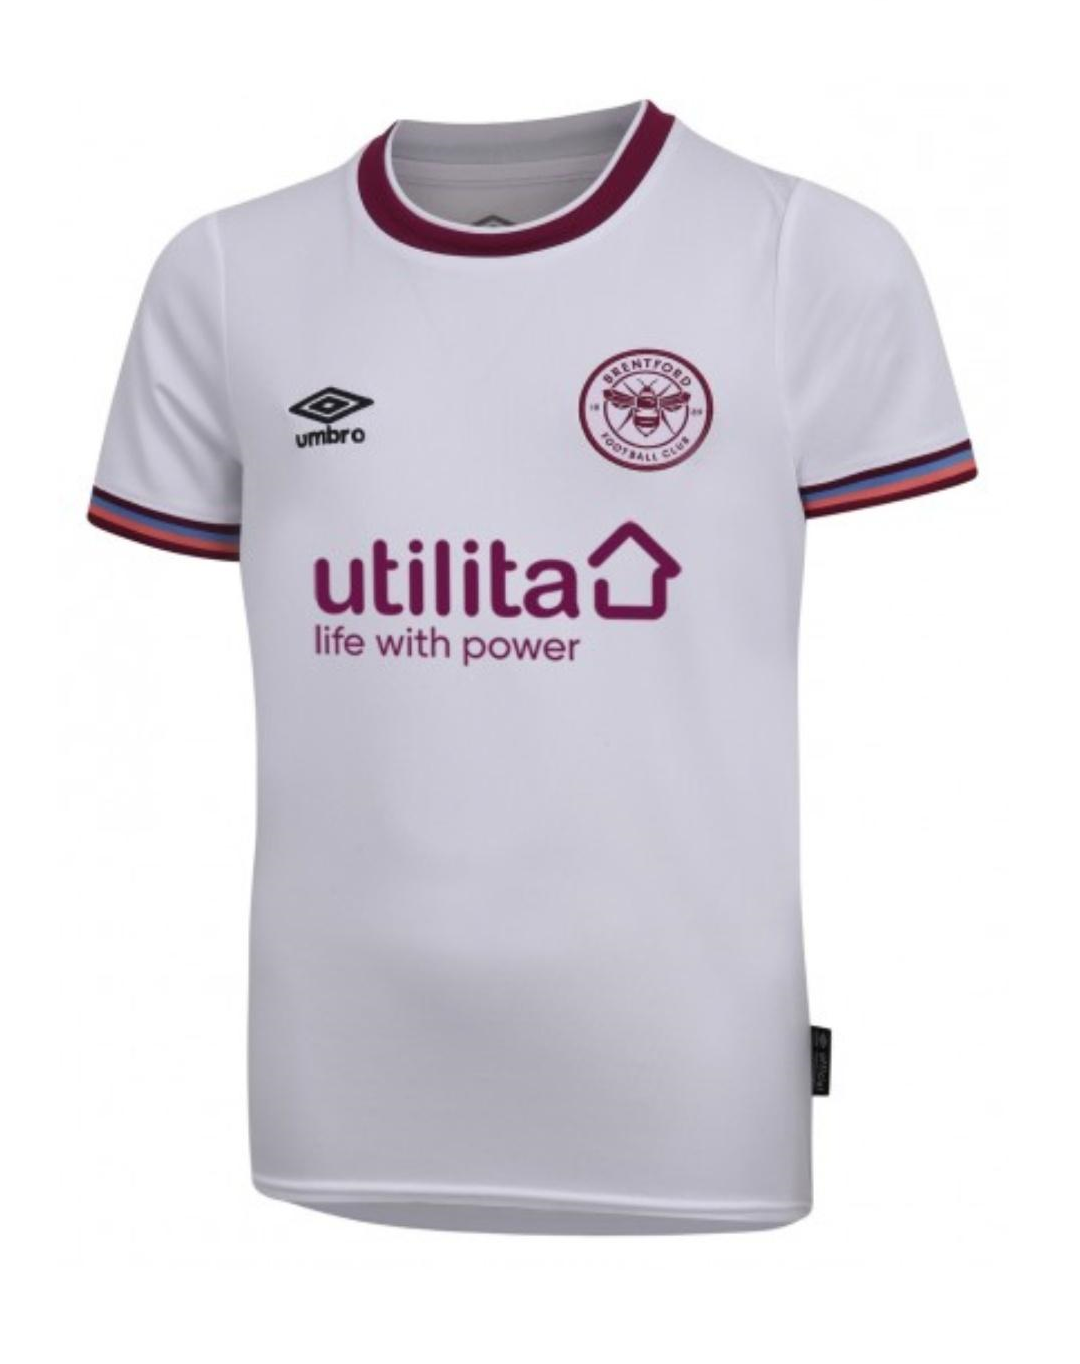 Brentford Third 2020/2021 Football Shirt Manufactured By Umbro. The Club Plays Football In The Championship.